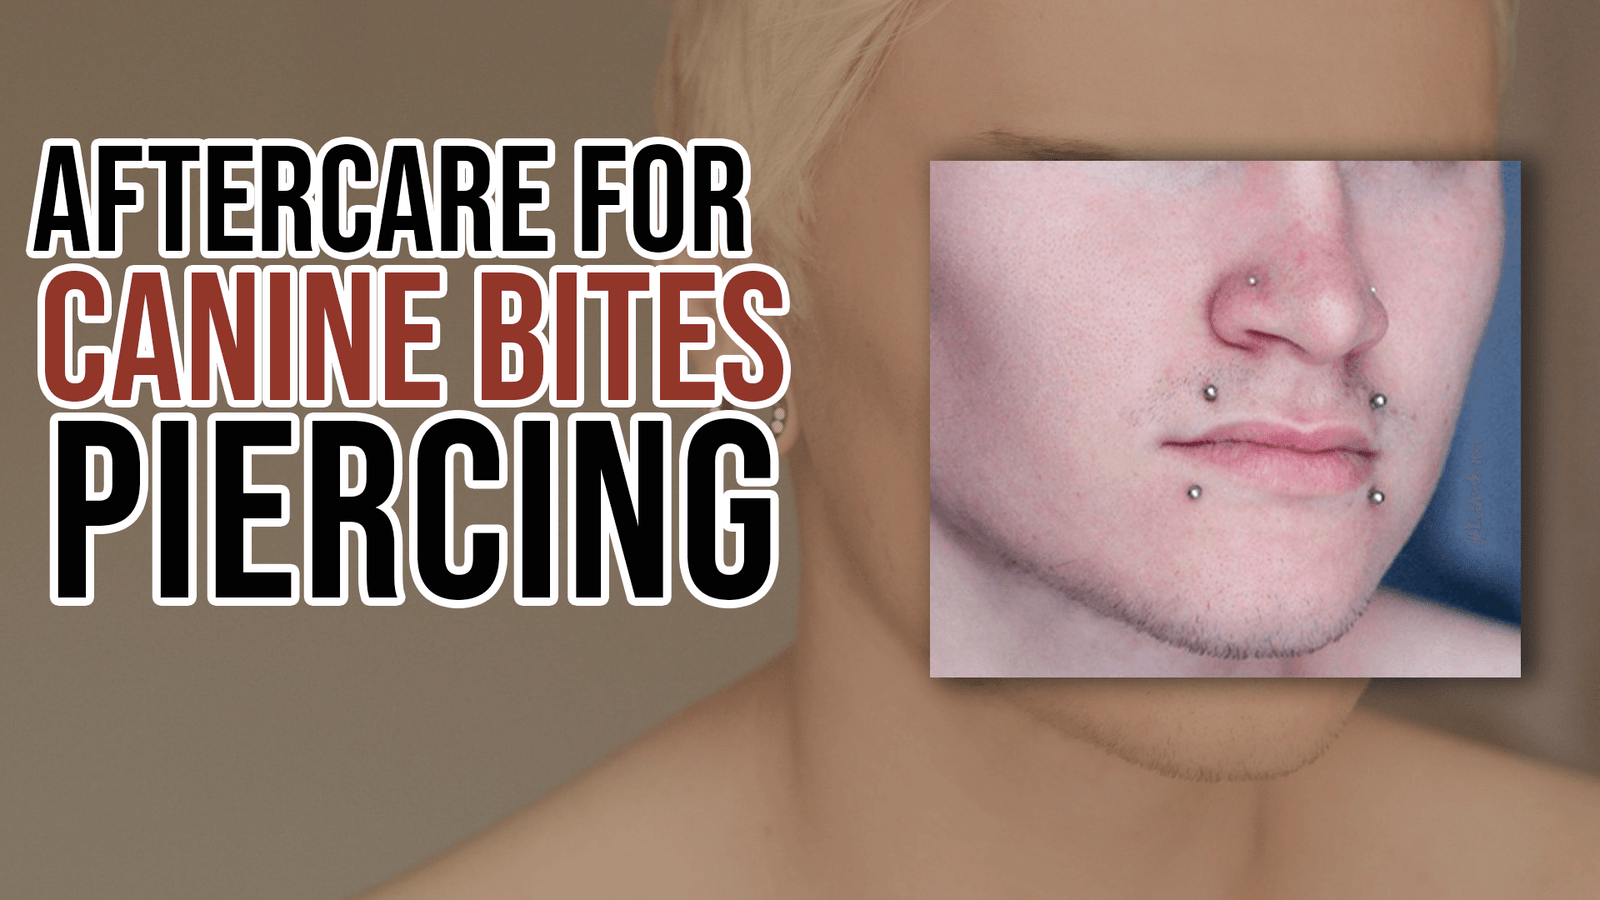 Aftercare for Canine Bites Piercing